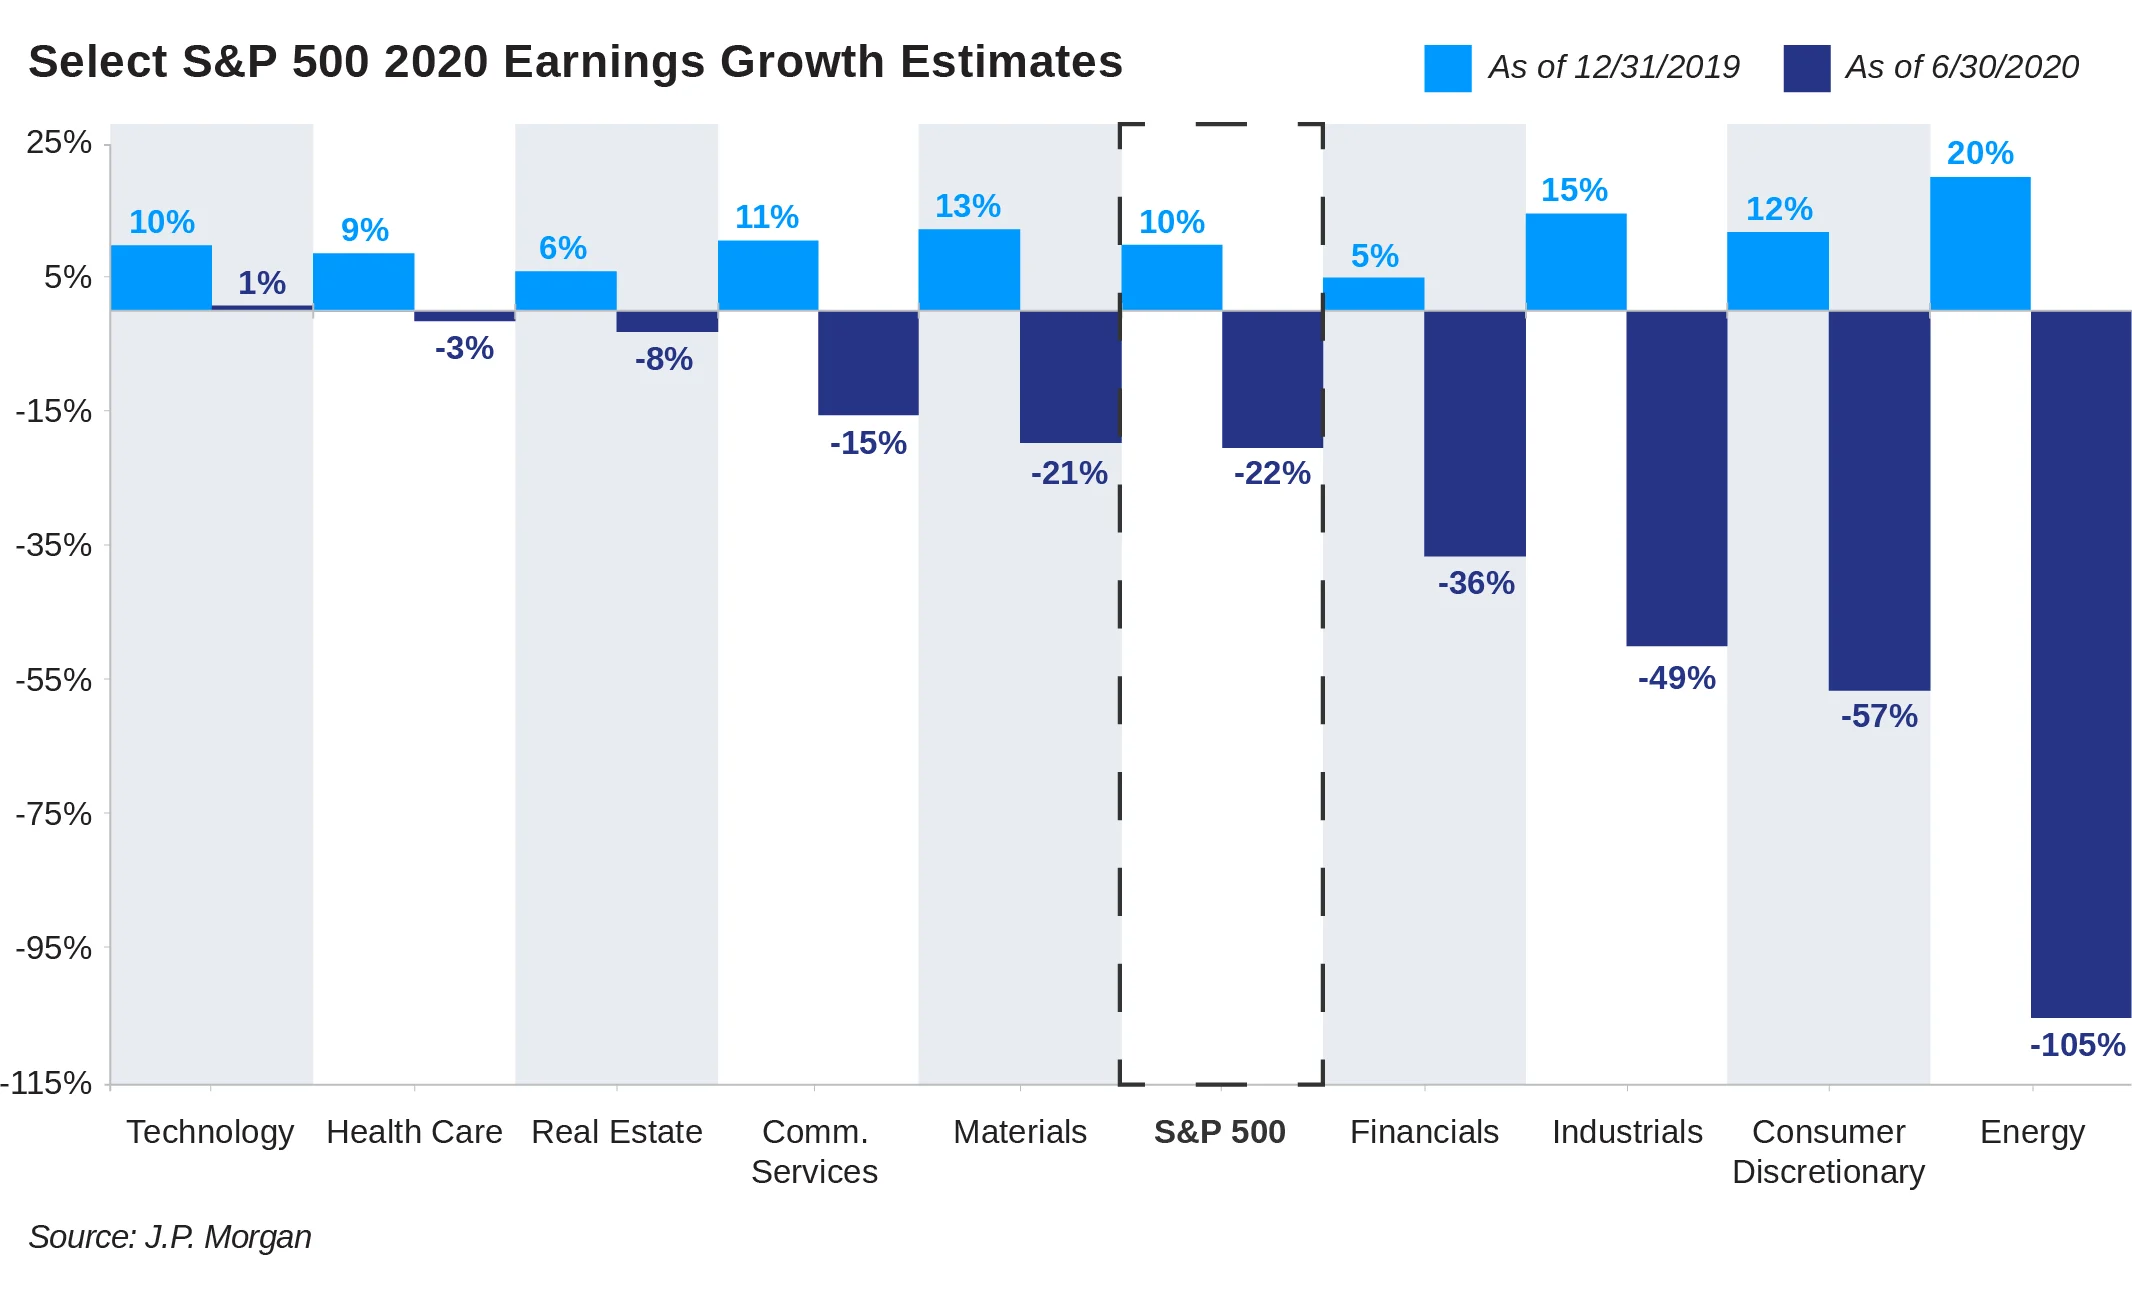 2_Select S&P 500 Earnings Growth Estimates